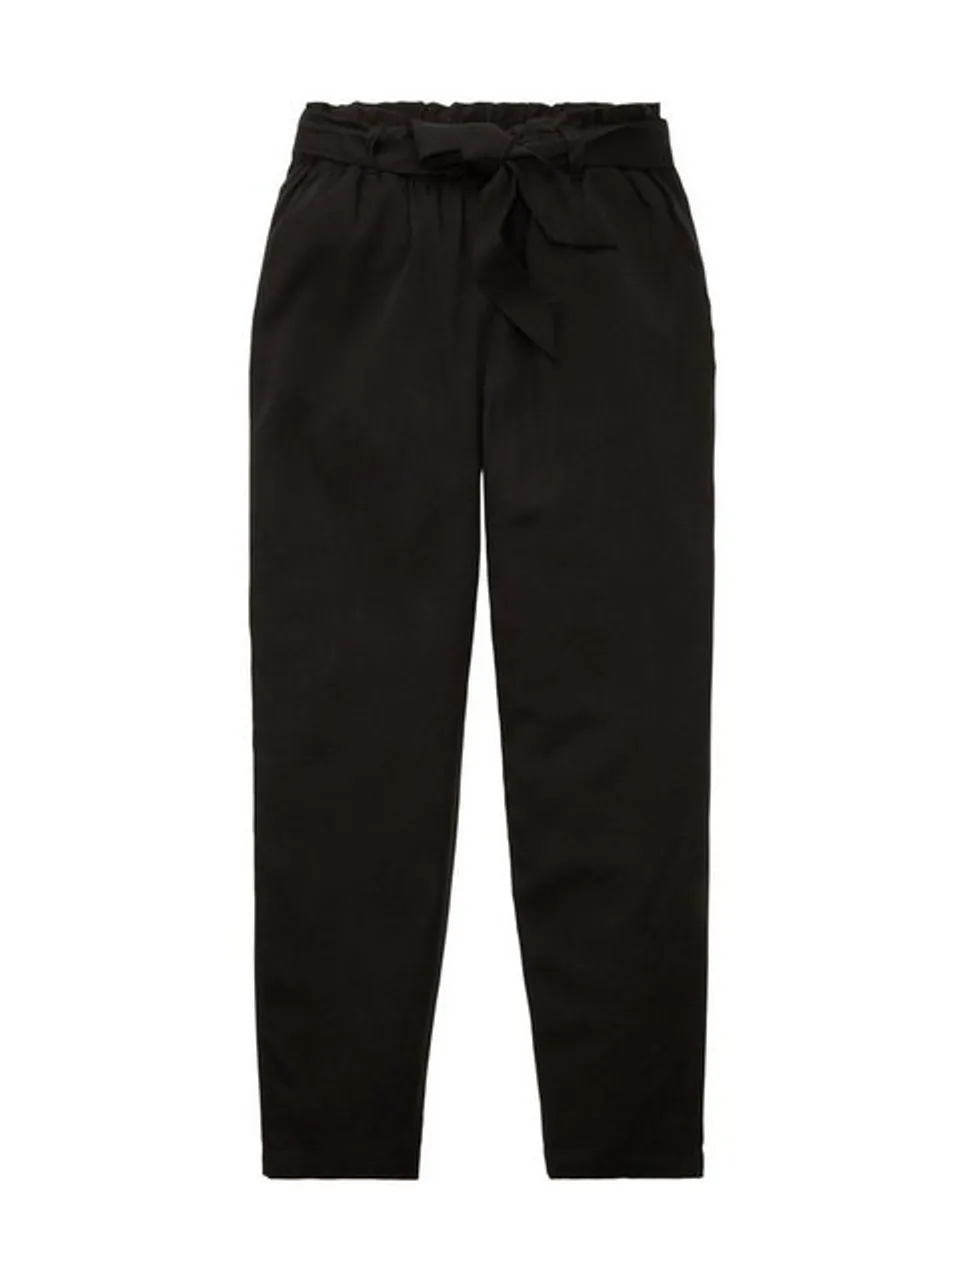 TOM TAILOR Jerseyhose Relaxed tapered pants